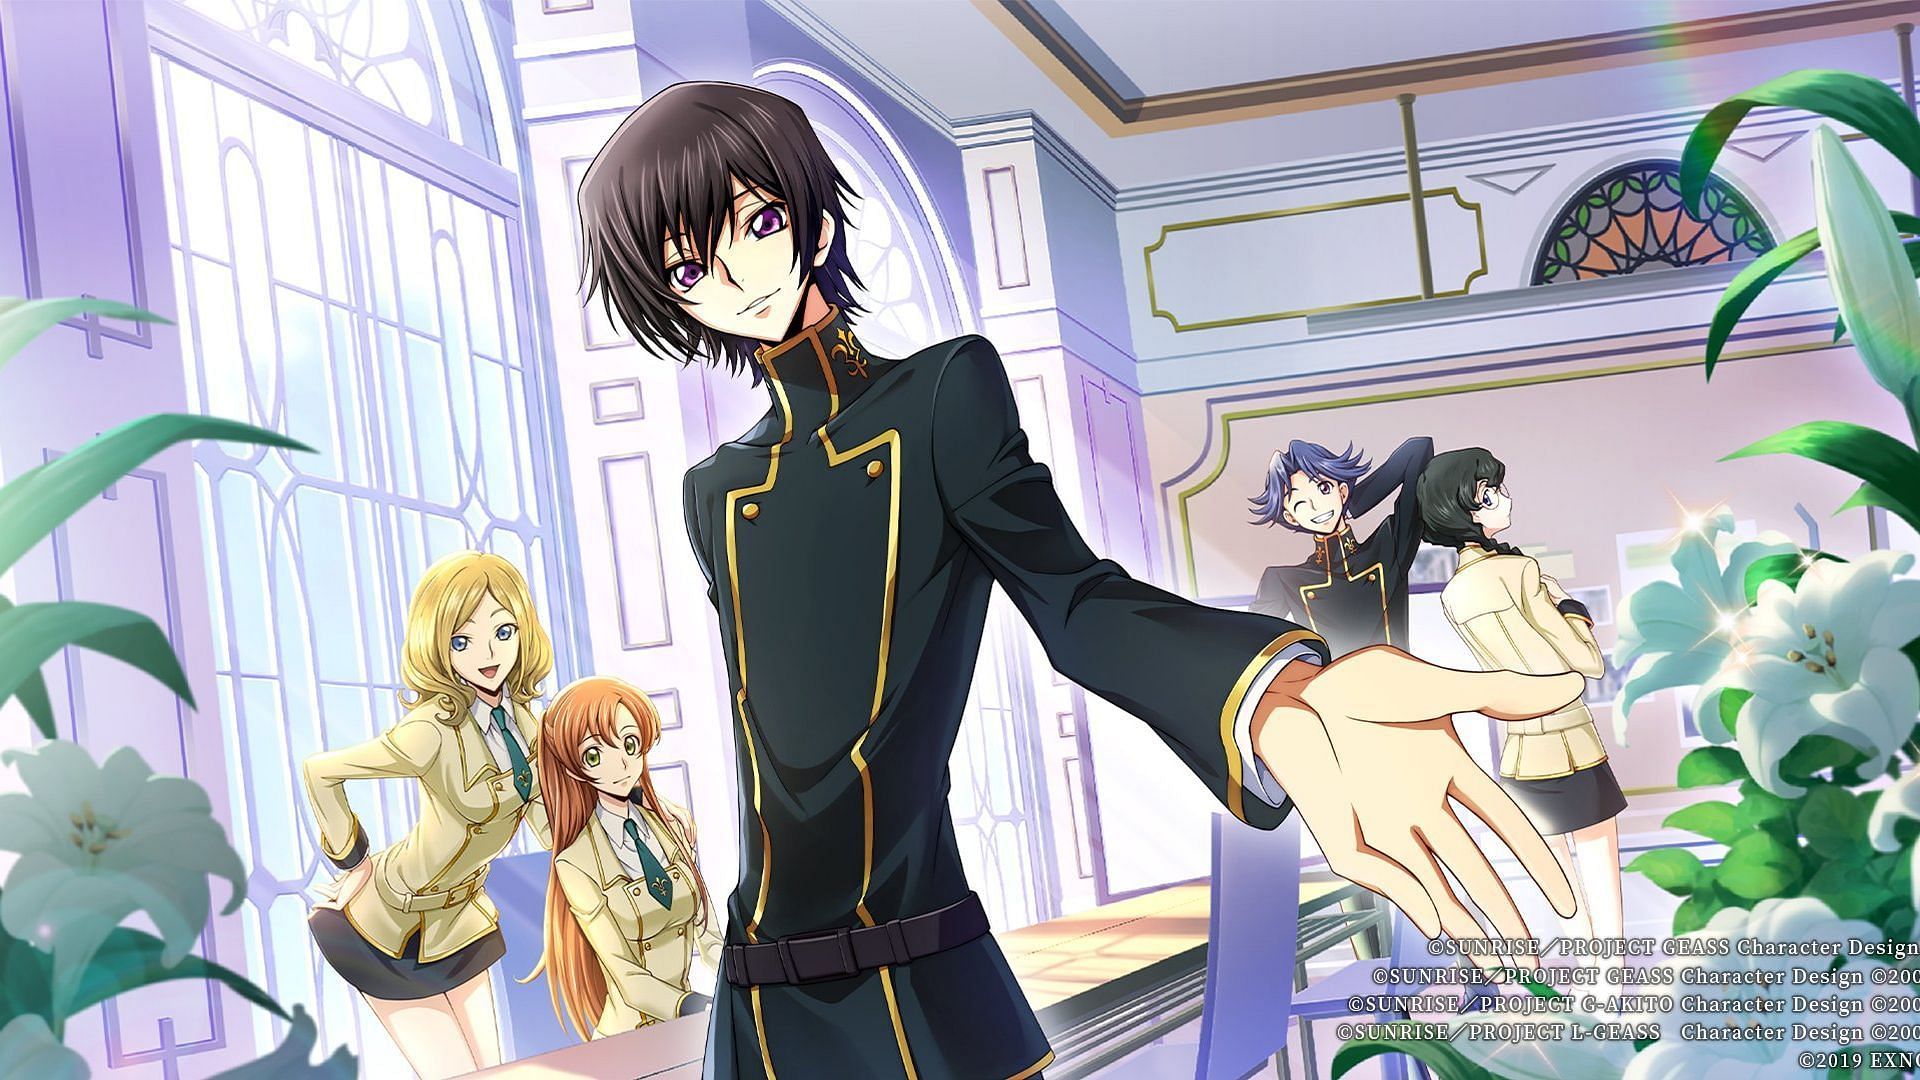 Pre-registrations are open for the latest Code Geass game. (Image via Komoe Games)